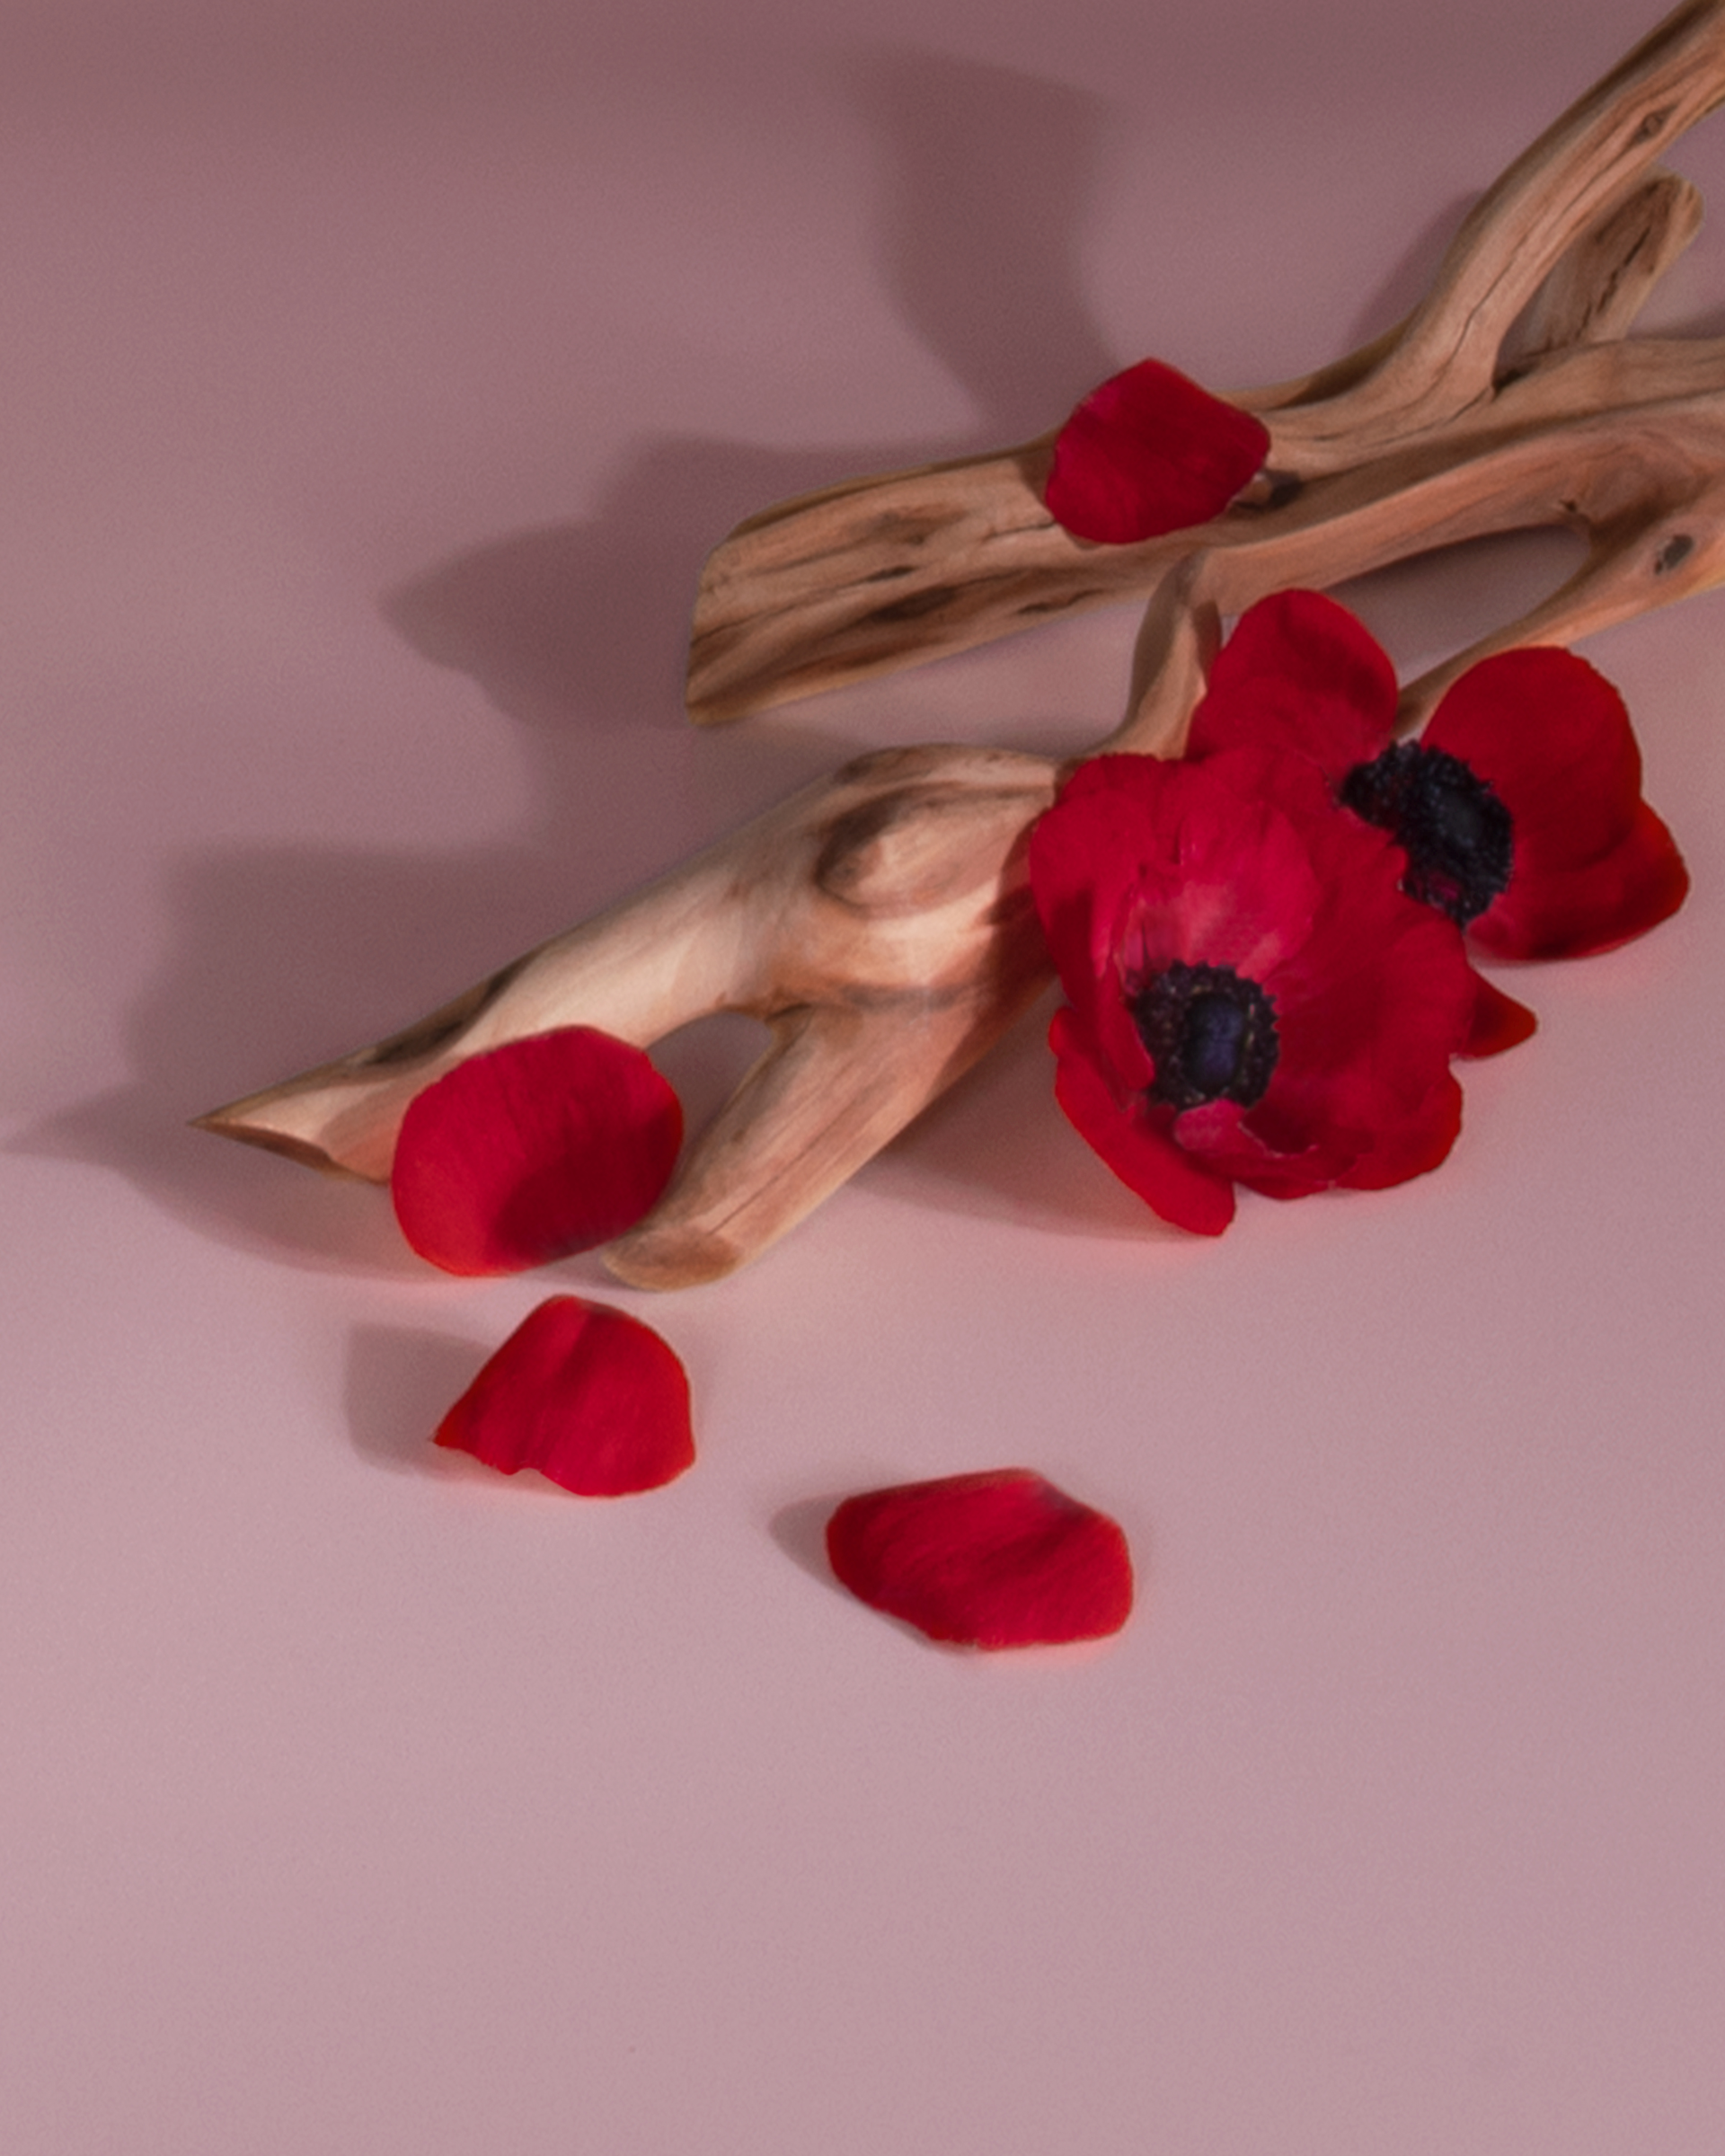 Red Poppies + Rosewood scent cues